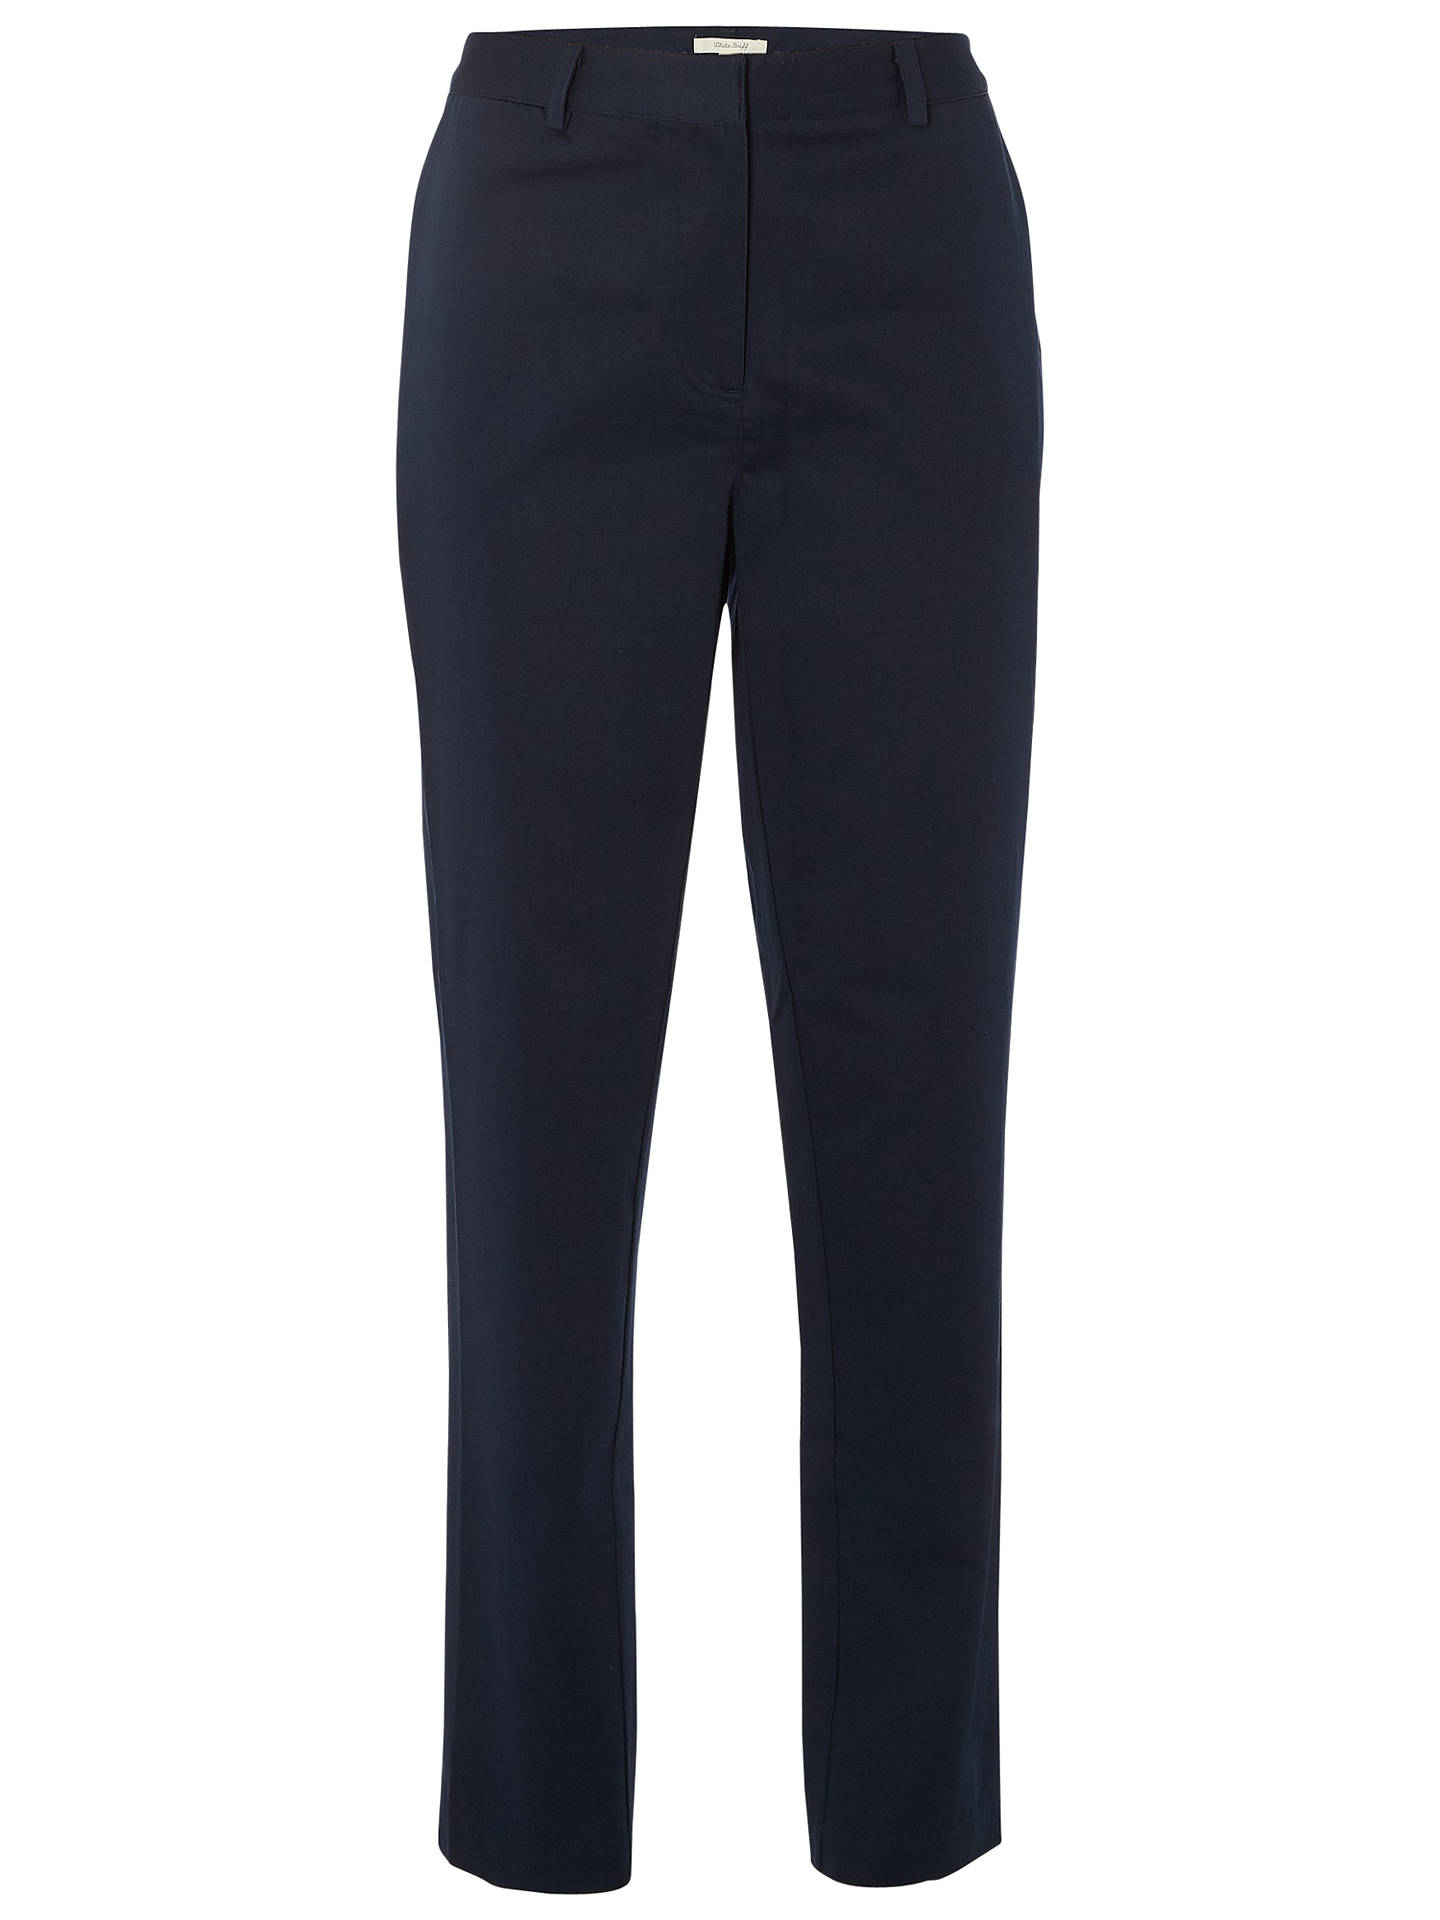 White Stuff Sara Slouch Trousers, Blue at John Lewis & Partners